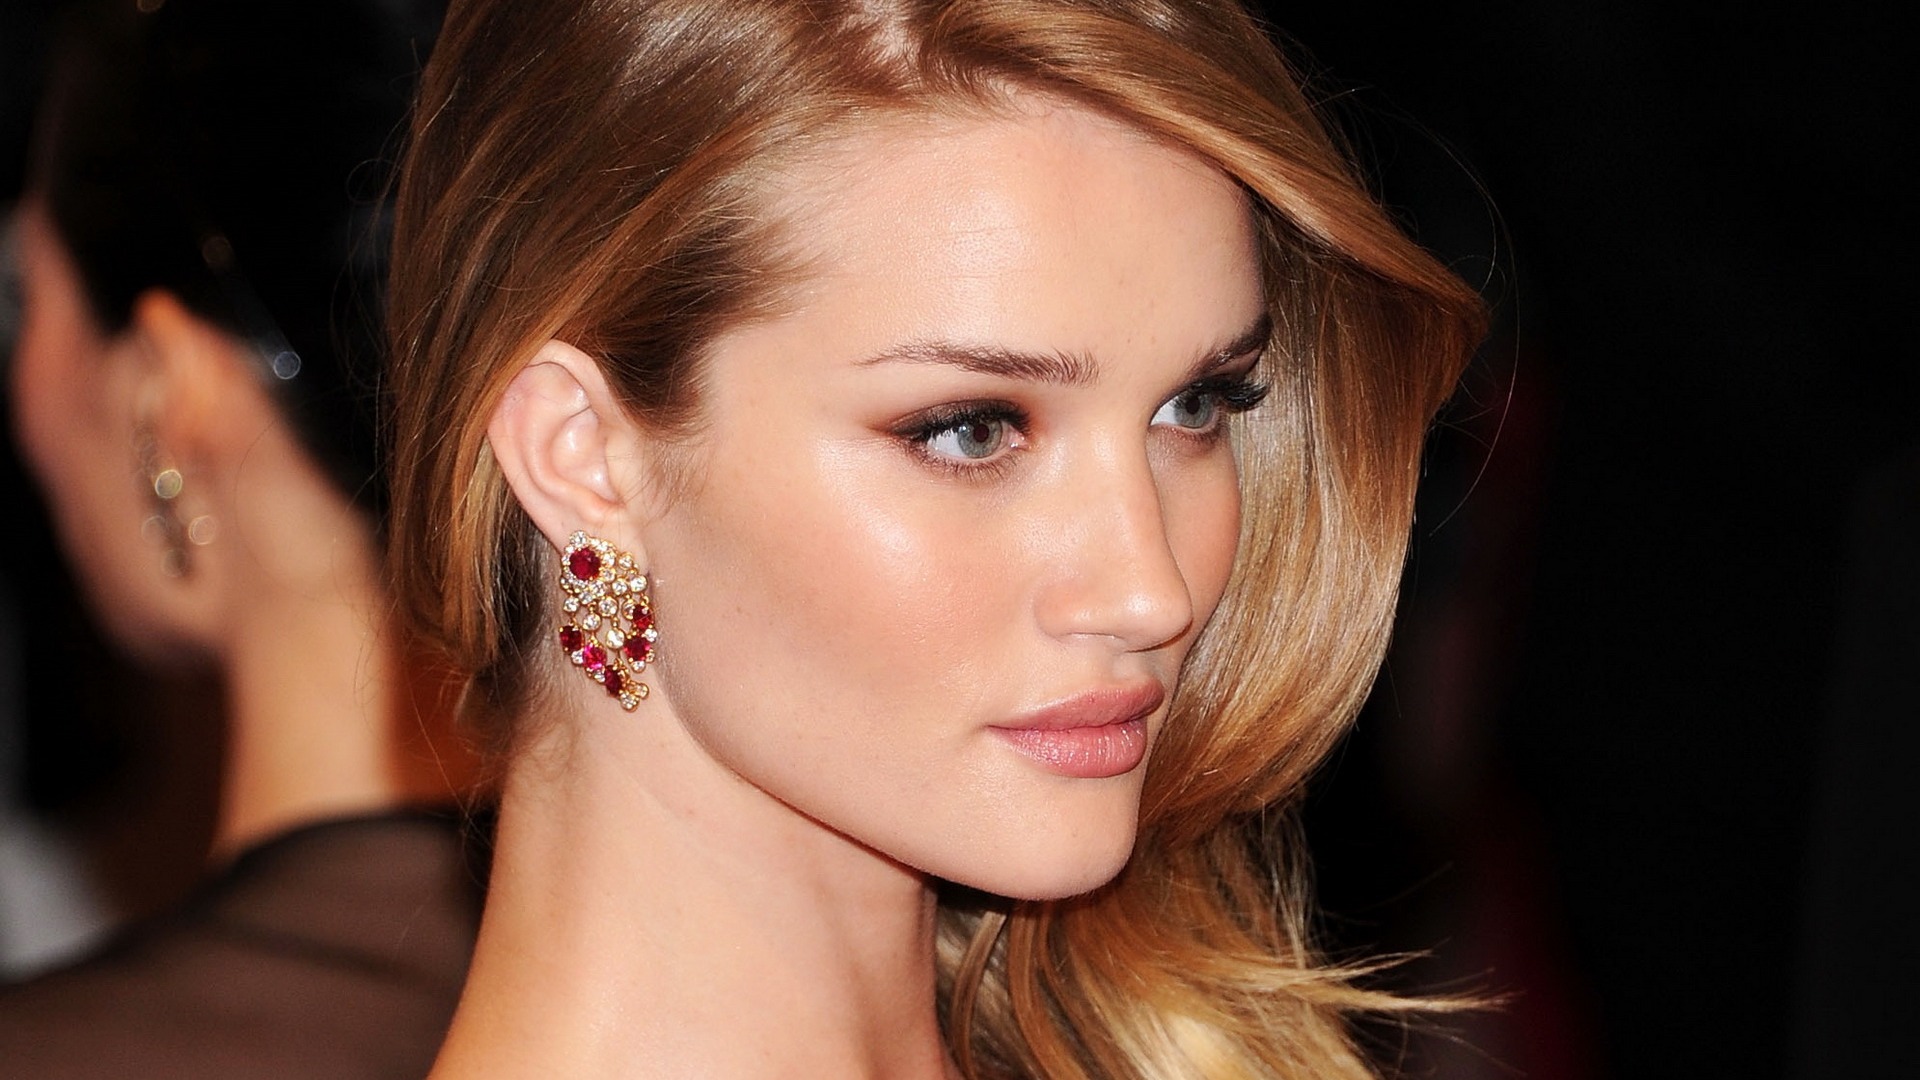 Rosie Huntington Whiteley #006 - 1920x1080 Wallpapers Pictures Photos Images